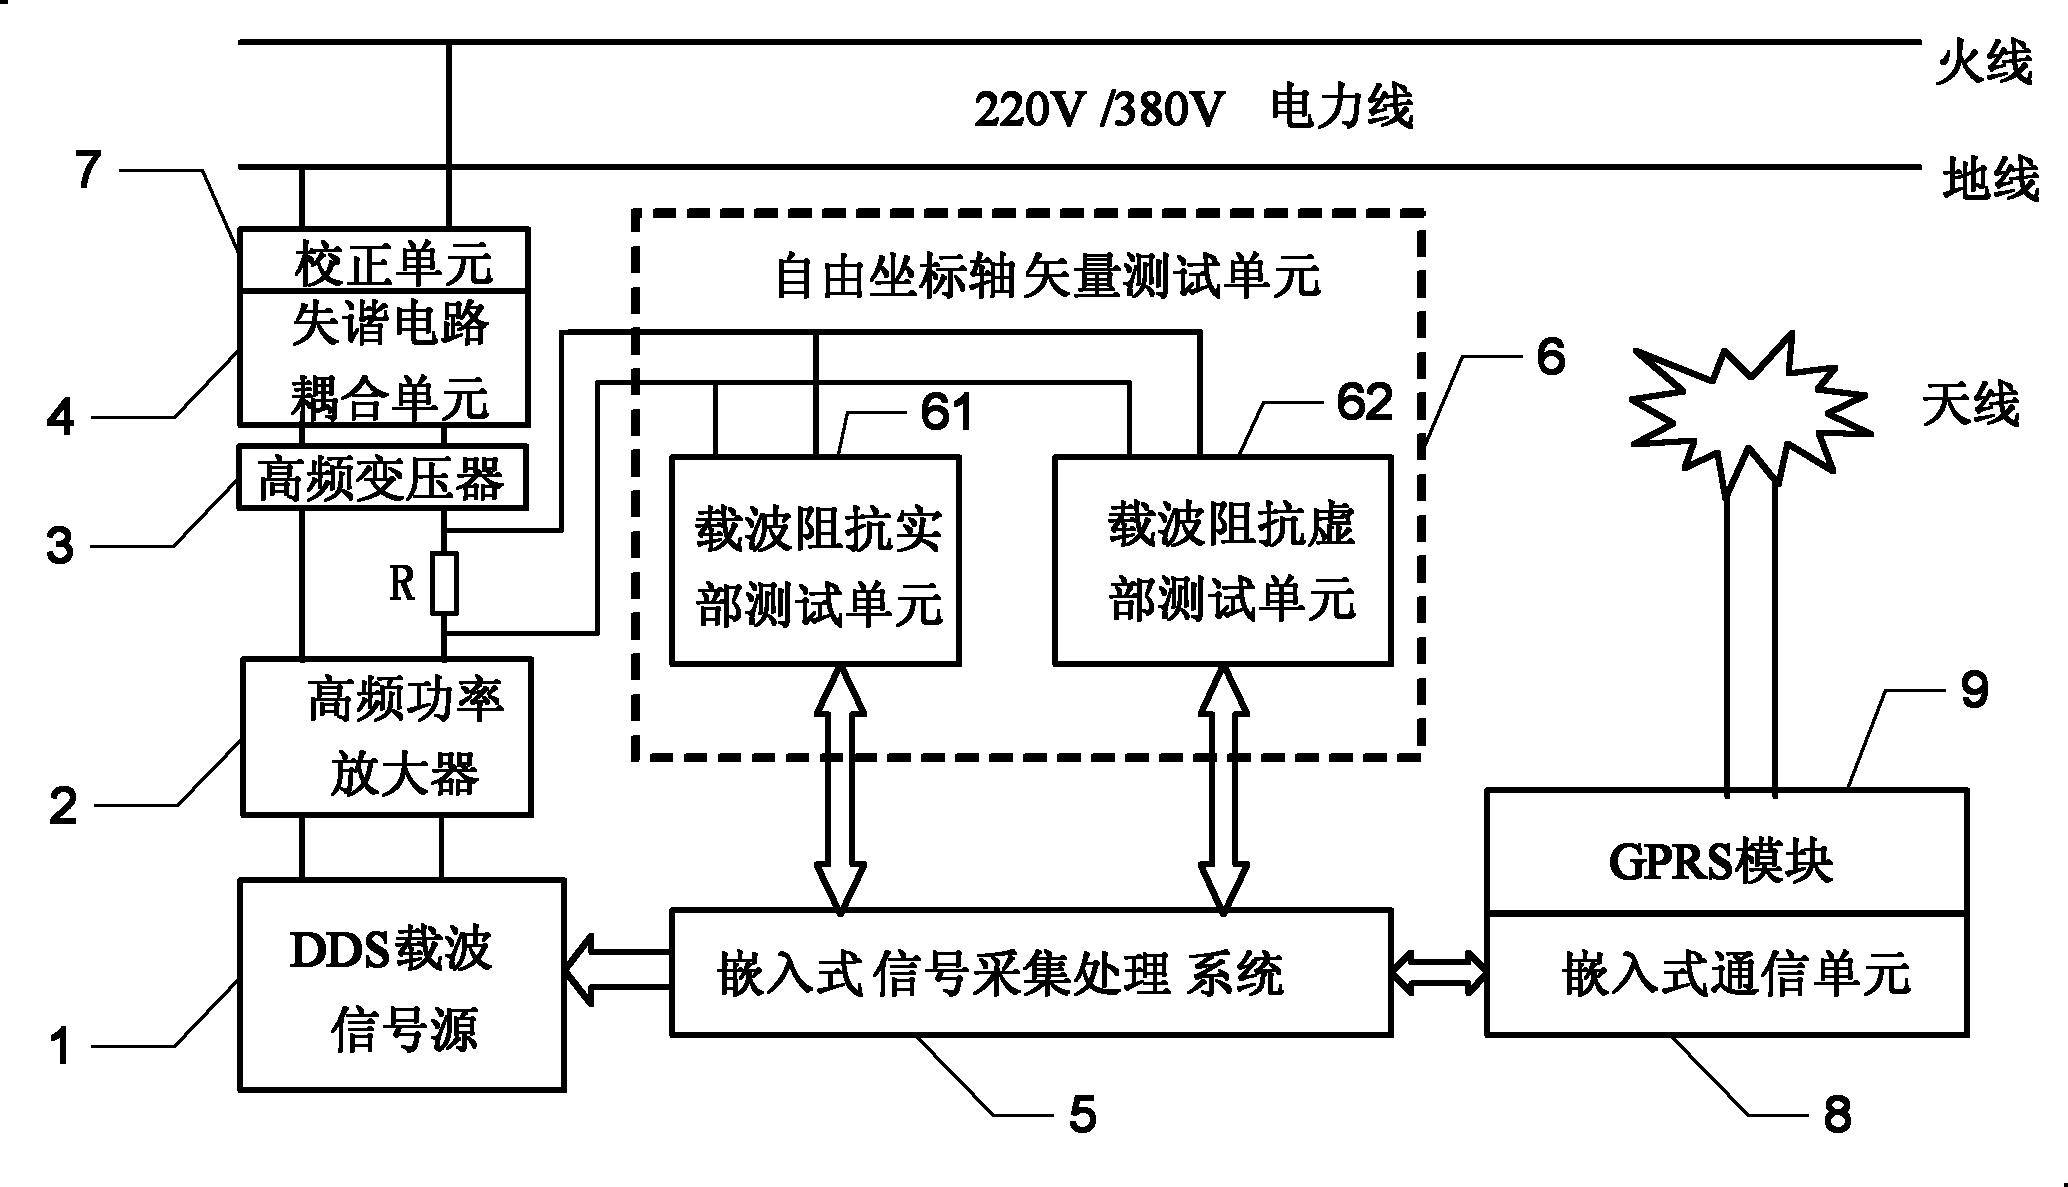 Impedance test device of low-voltage electric power carrier channel